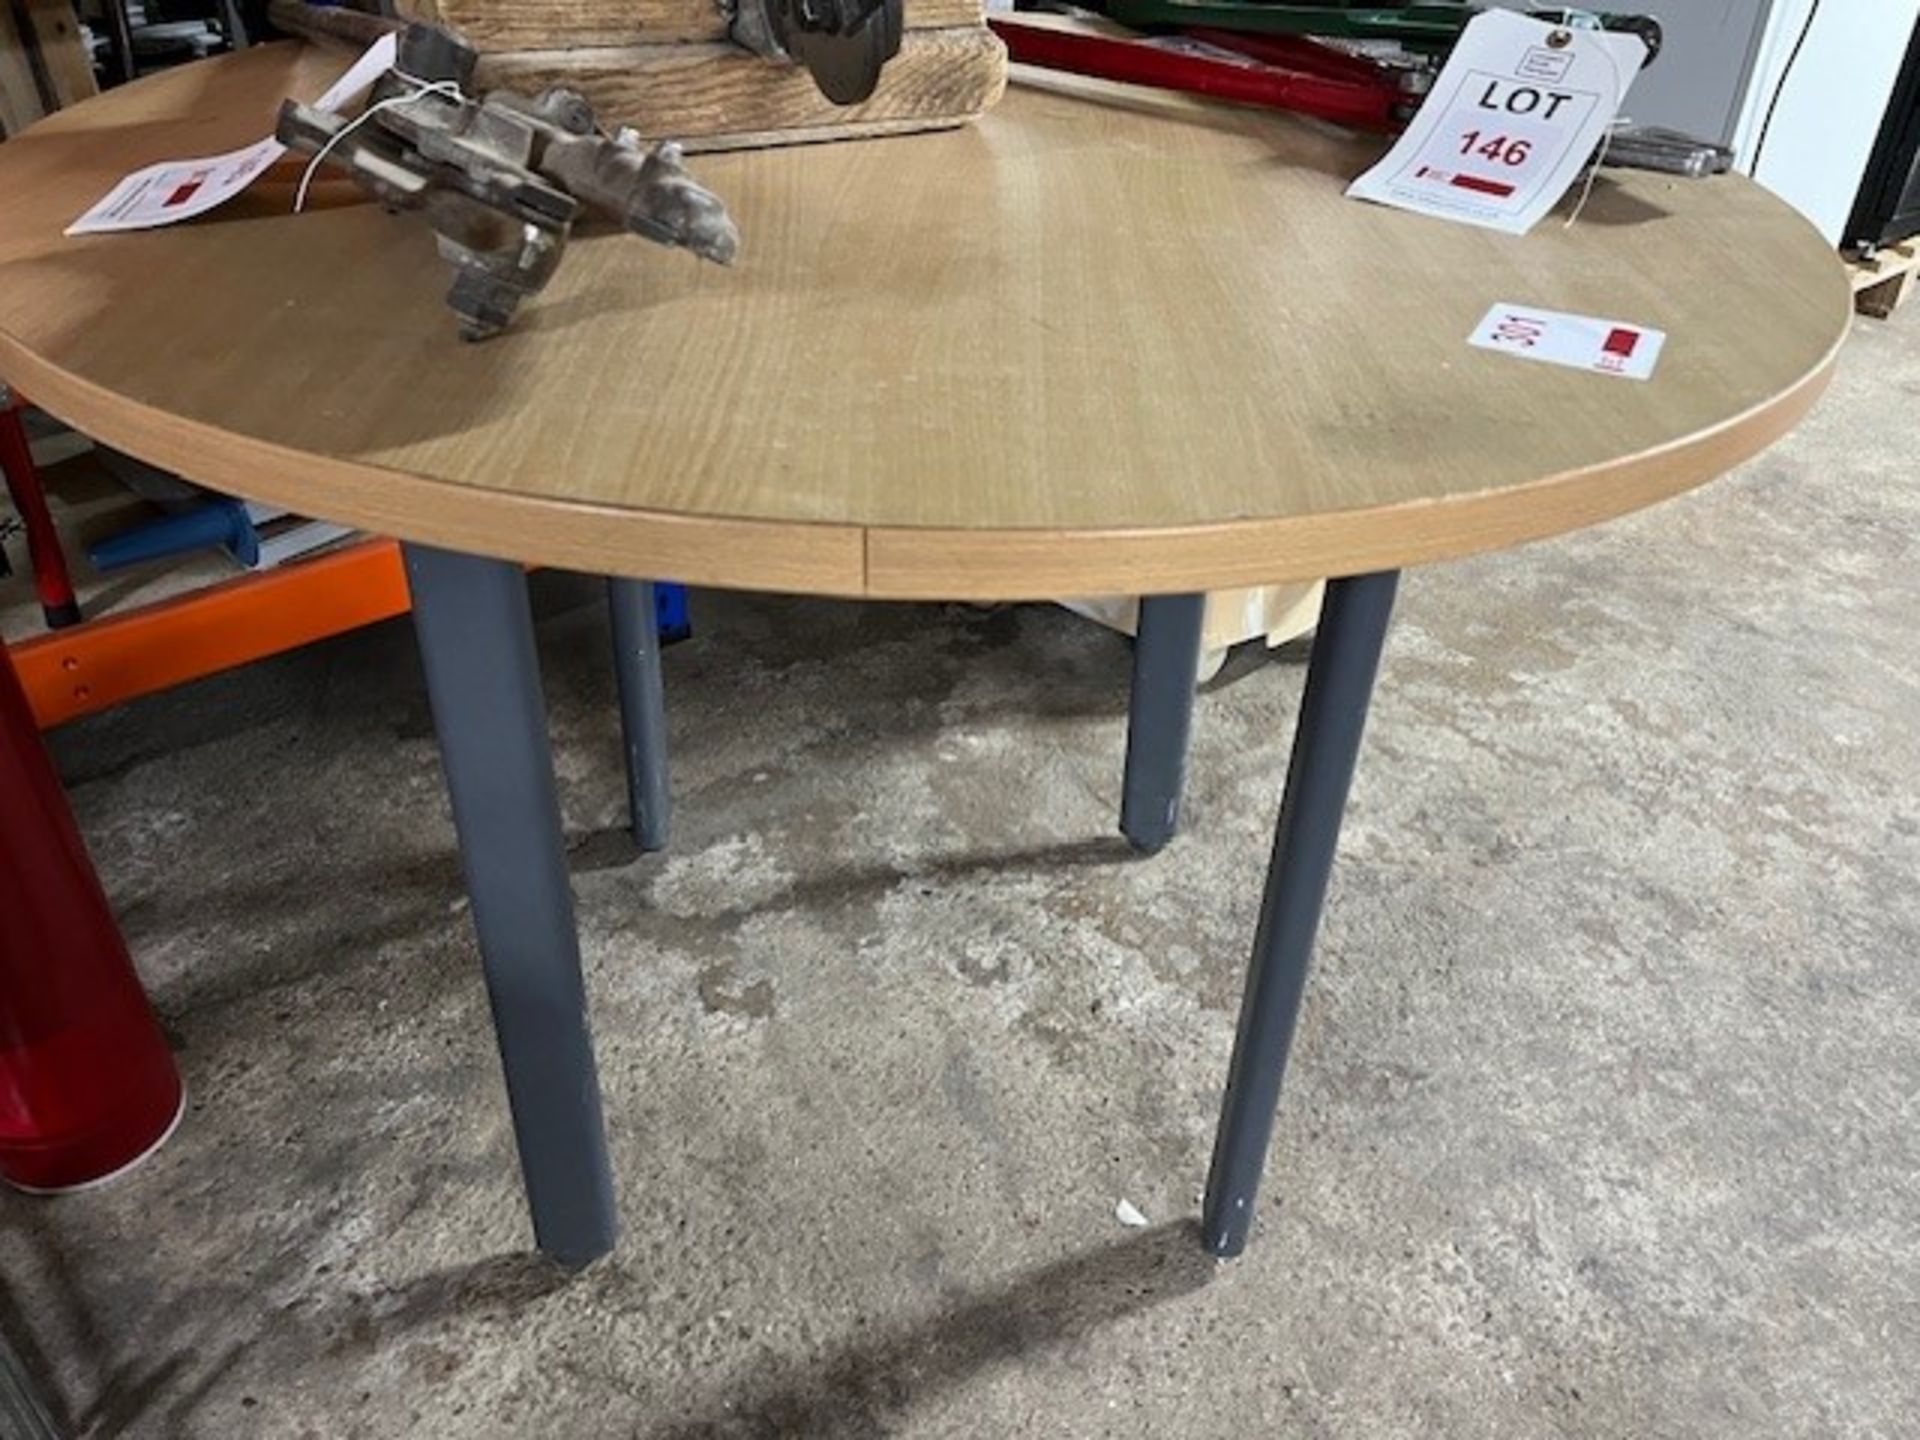 Light wood effect circular table, 1m dia? with 4 chrome frame upholstered chairs